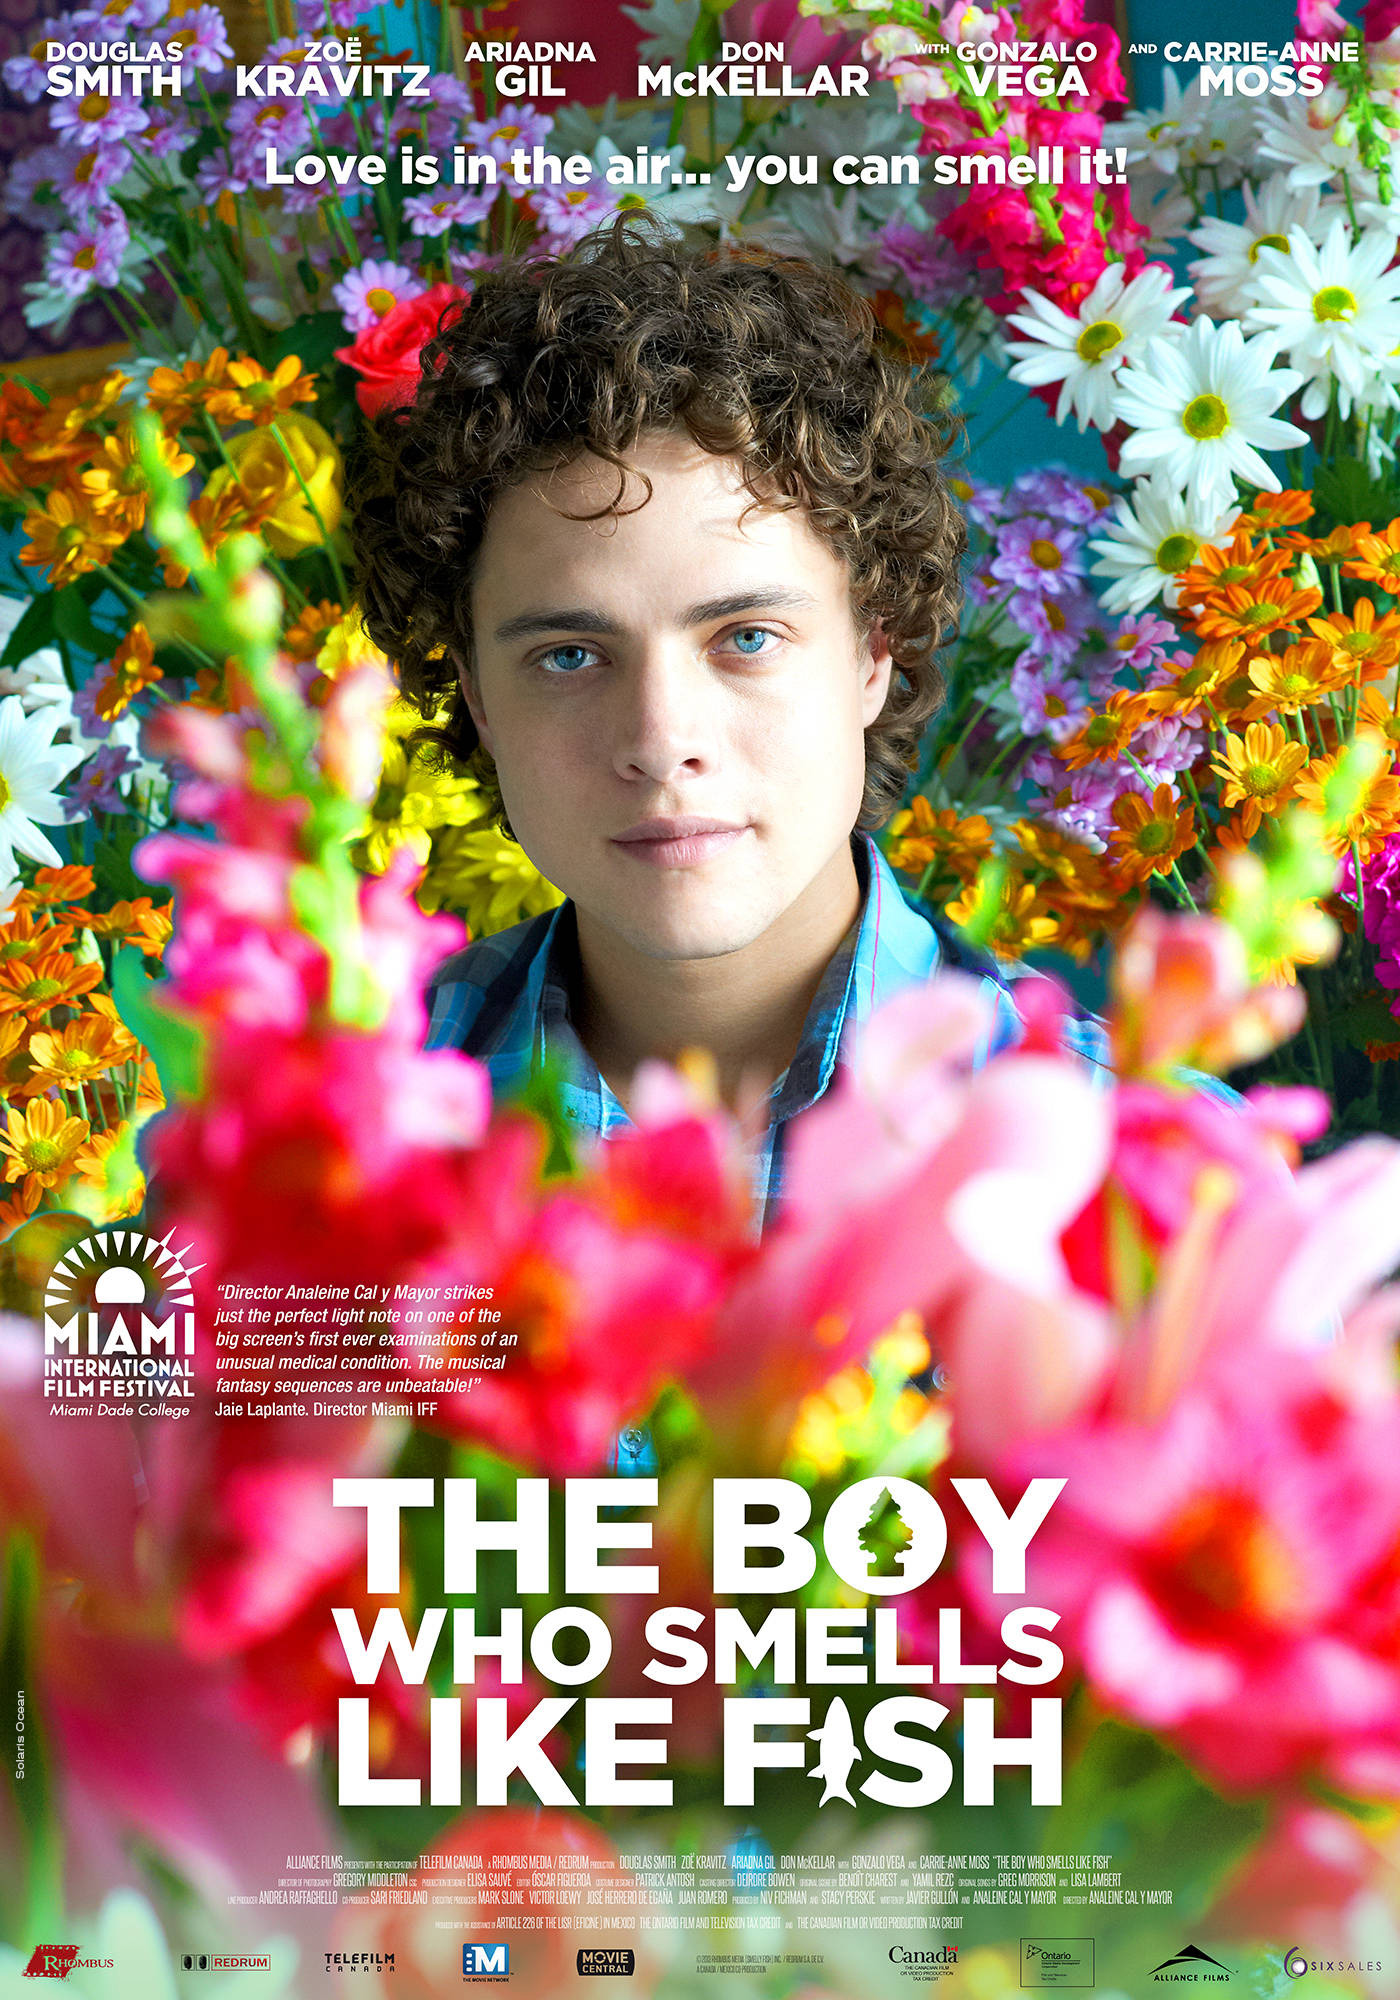 THE BOY WHO SMELLS LIKE FISH (Analeine Cal · 2013)